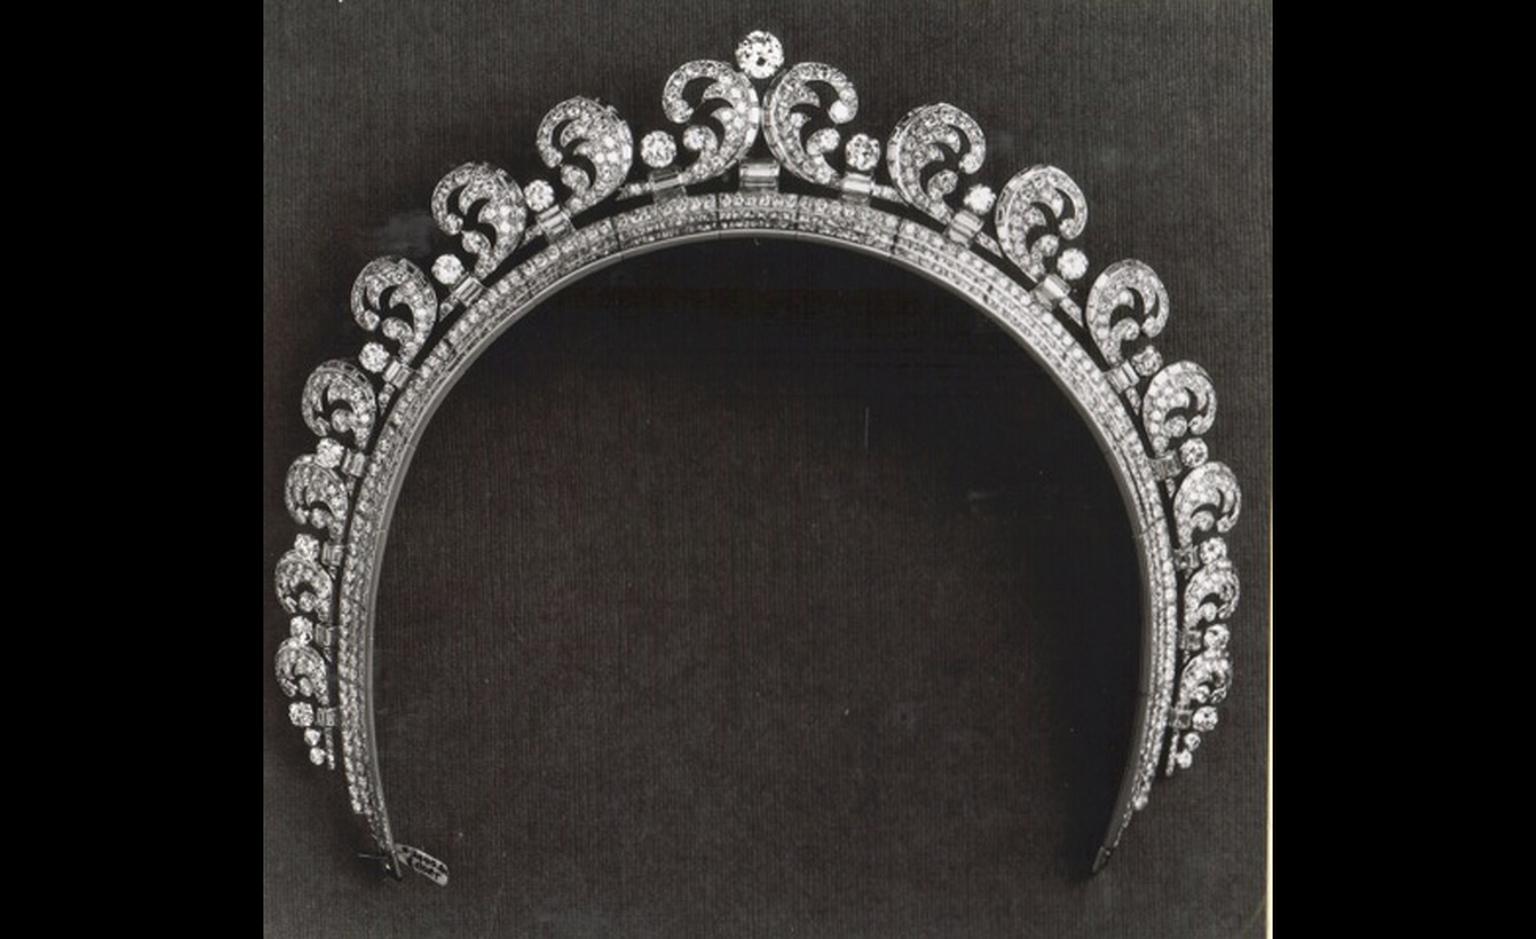 Cartier 1936 Halo tiara as worn by Kate Middleton at her wedding to Prince William. The tiara was made in Cartier's London workshops and includes almost 800 diamonds. Photo: Cartier archives